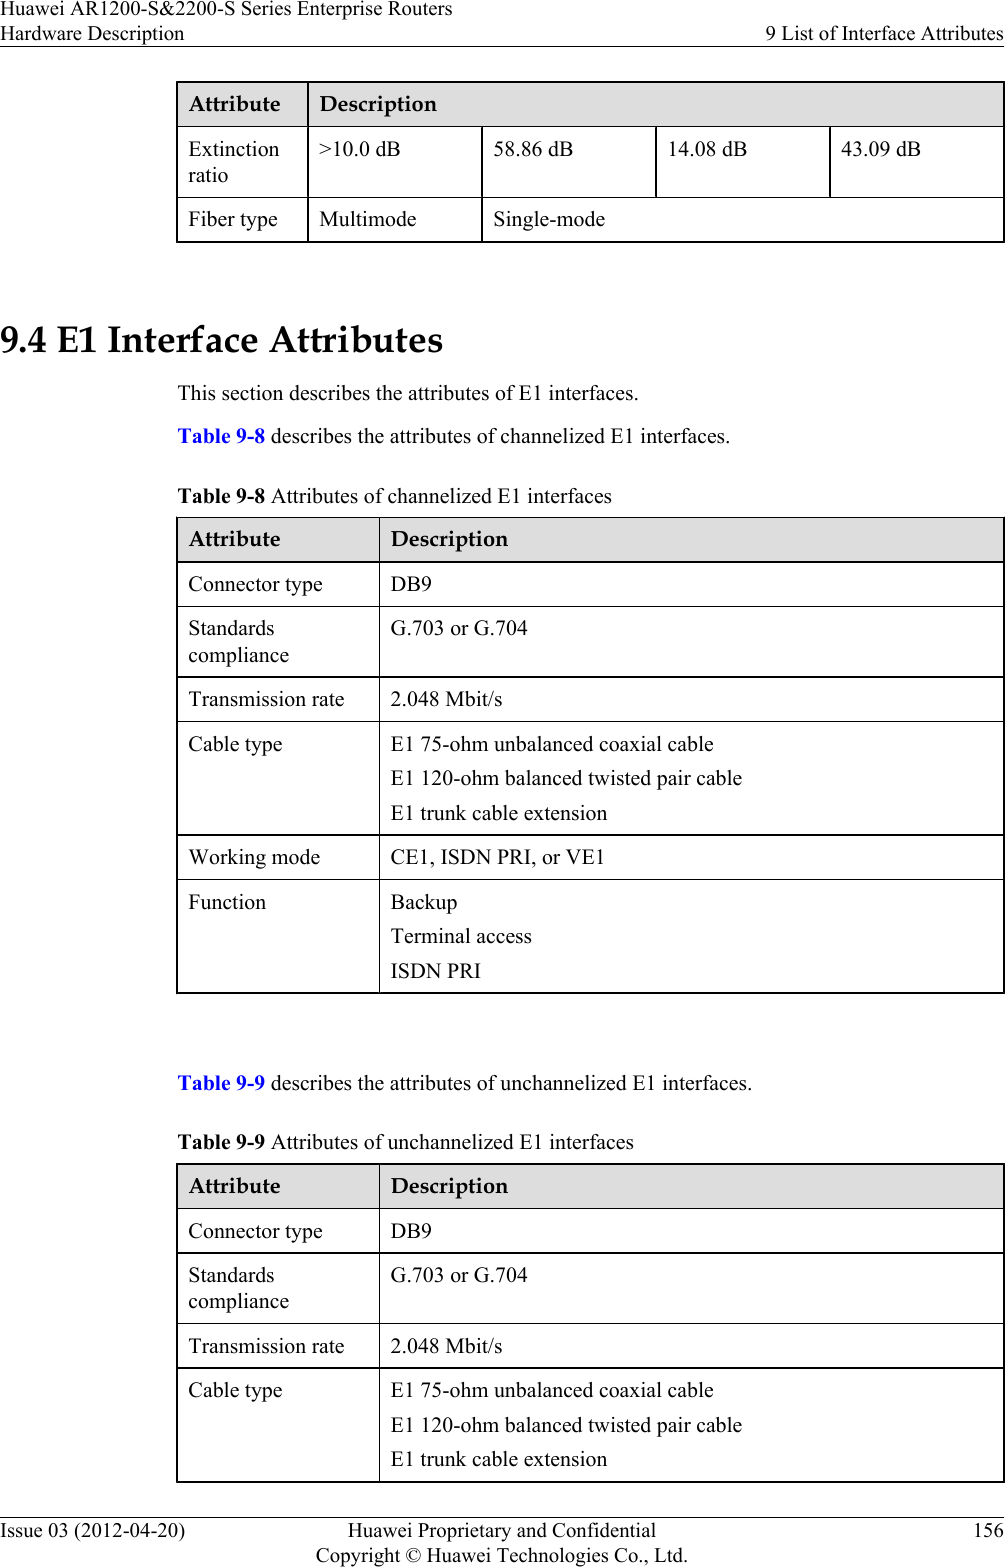 Attribute DescriptionExtinctionratio&gt;10.0 dB 58.86 dB 14.08 dB 43.09 dBFiber type Multimode Single-mode 9.4 E1 Interface AttributesThis section describes the attributes of E1 interfaces.Table 9-8 describes the attributes of channelized E1 interfaces.Table 9-8 Attributes of channelized E1 interfacesAttribute DescriptionConnector type DB9StandardscomplianceG.703 or G.704Transmission rate 2.048 Mbit/sCable type E1 75-ohm unbalanced coaxial cableE1 120-ohm balanced twisted pair cableE1 trunk cable extensionWorking mode CE1, ISDN PRI, or VE1Function BackupTerminal accessISDN PRI Table 9-9 describes the attributes of unchannelized E1 interfaces.Table 9-9 Attributes of unchannelized E1 interfacesAttribute DescriptionConnector type DB9StandardscomplianceG.703 or G.704Transmission rate 2.048 Mbit/sCable type E1 75-ohm unbalanced coaxial cableE1 120-ohm balanced twisted pair cableE1 trunk cable extensionHuawei AR1200-S&amp;2200-S Series Enterprise RoutersHardware Description 9 List of Interface AttributesIssue 03 (2012-04-20) Huawei Proprietary and ConfidentialCopyright © Huawei Technologies Co., Ltd.156